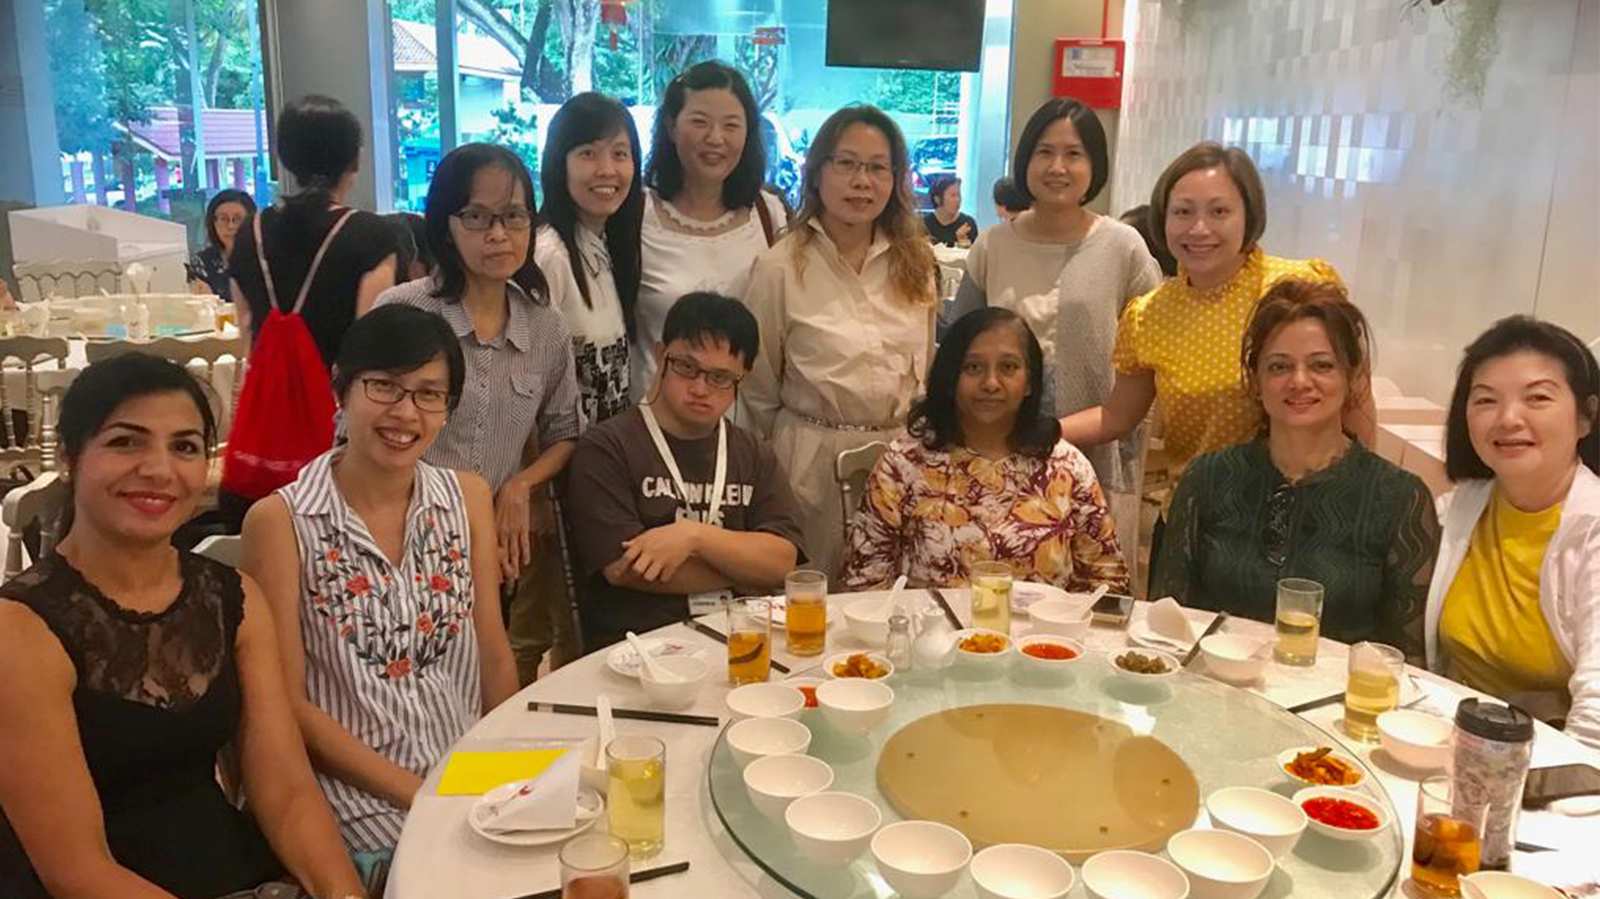 Family-owned restaurant in Ang Mo Kio treats extraordinary mums to special Mother’s Day dinner